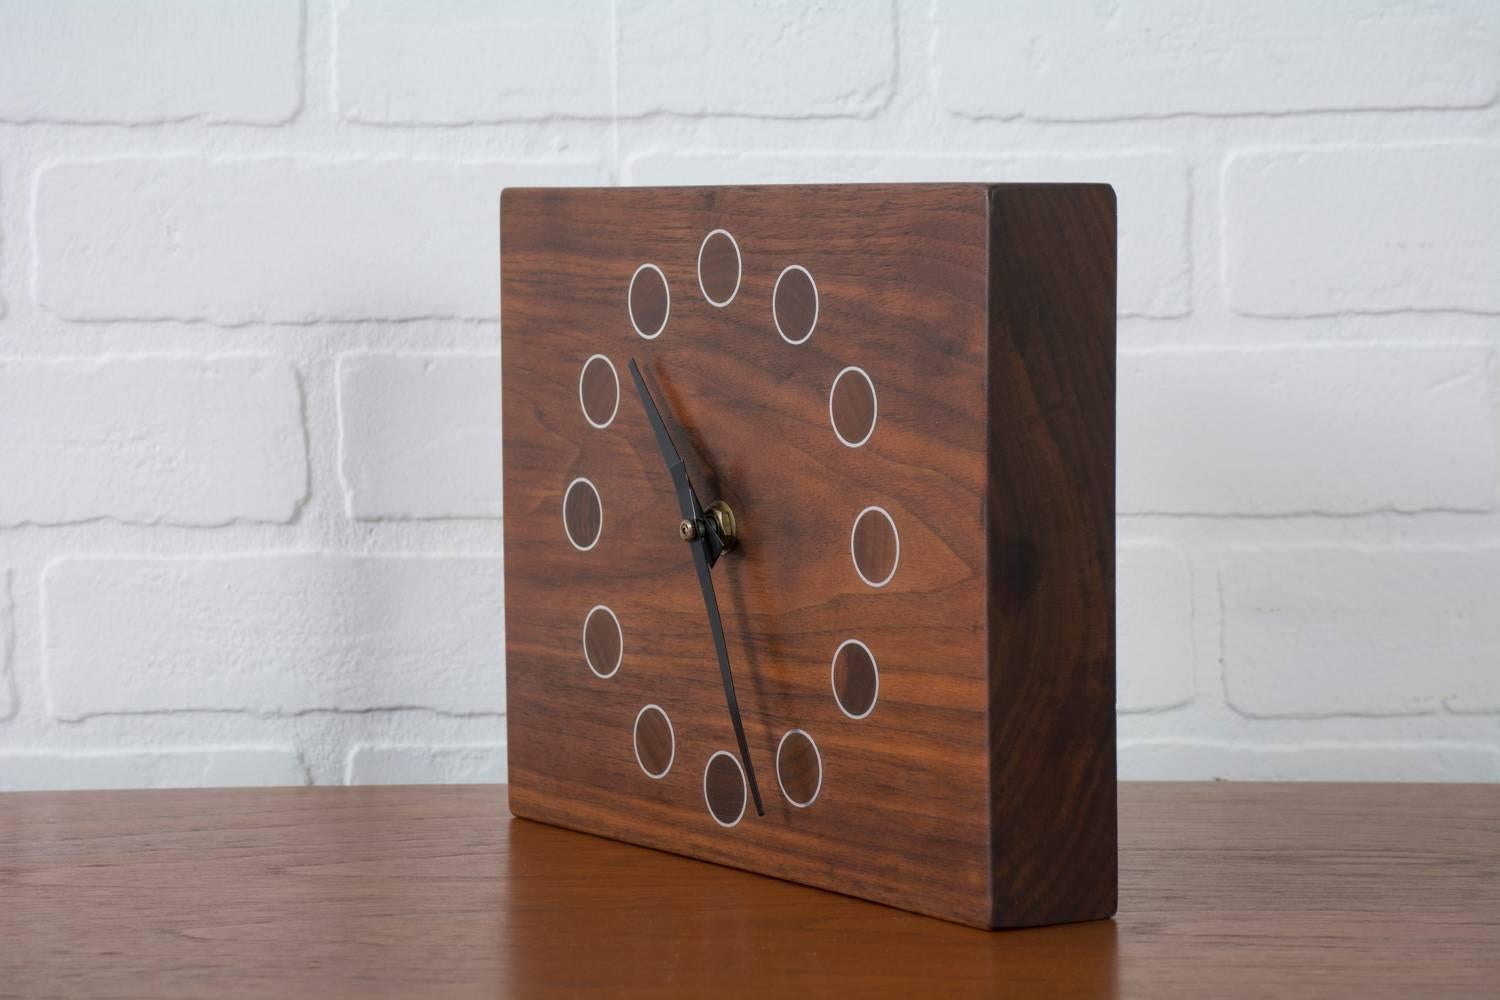 This Mid-Century Modern solid walnut clock can be used as a table/desk clock or as a wall clock.